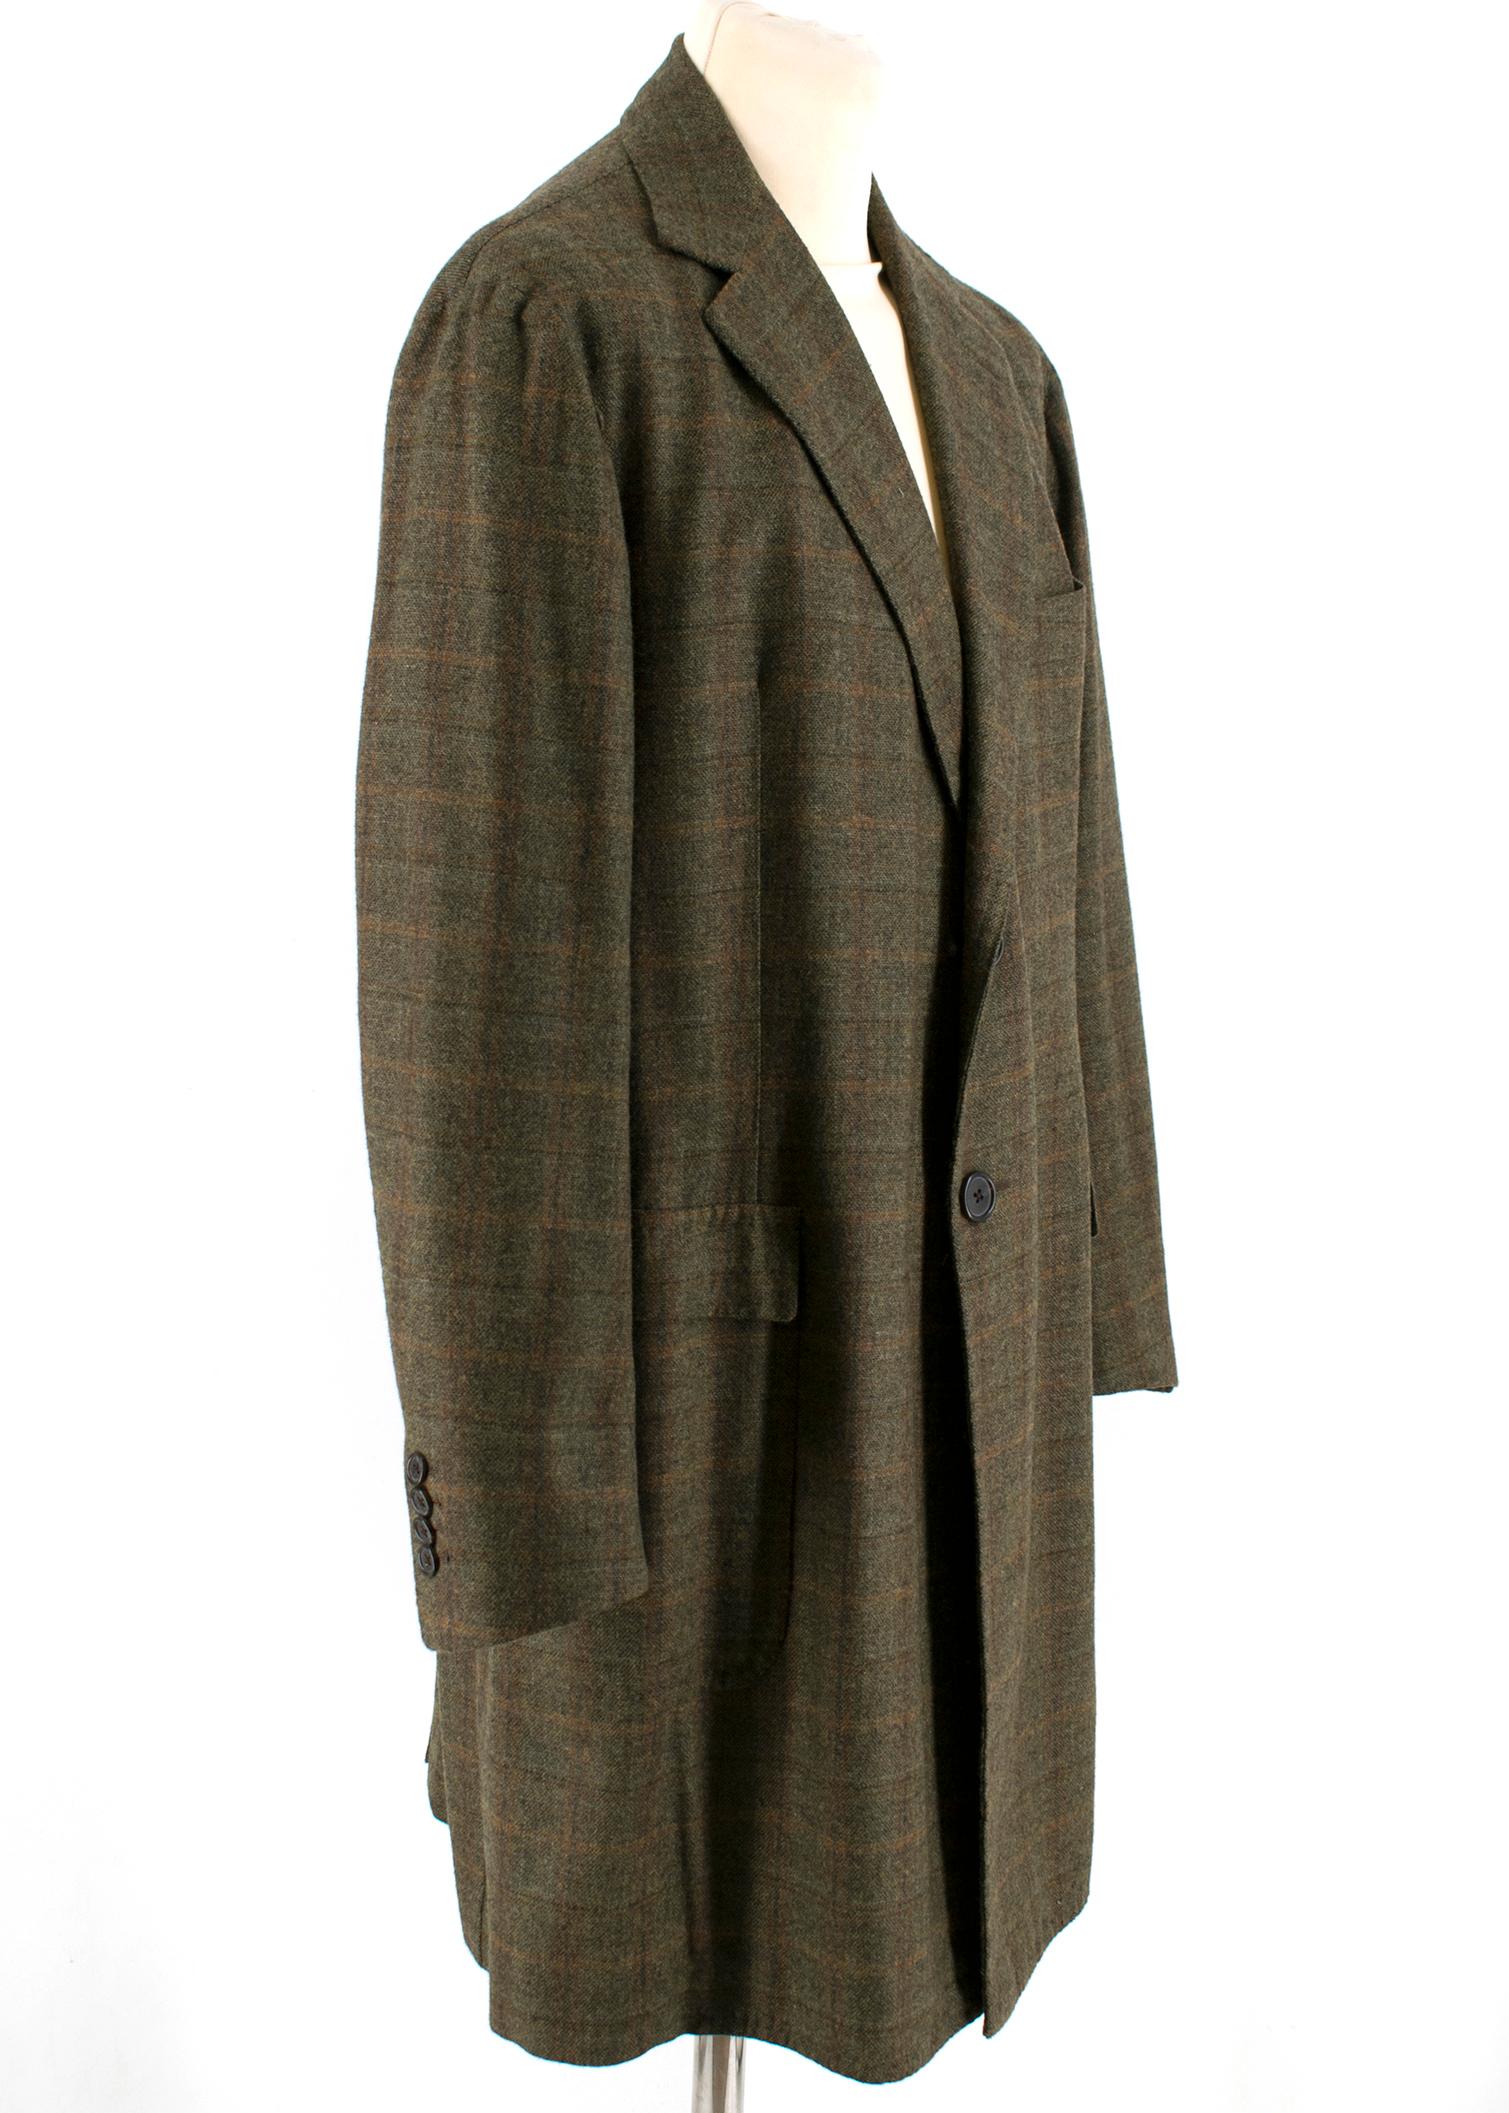 Gennaro Solito Bespoke Wool Green Checked Coat

- Moss Green, Blue, Orange and dark Orange checked woven coat
- Dark green button closure and dark brown cuff
- One chest pocket
- Single breasted coat

Please note, these items are pre-owned and may